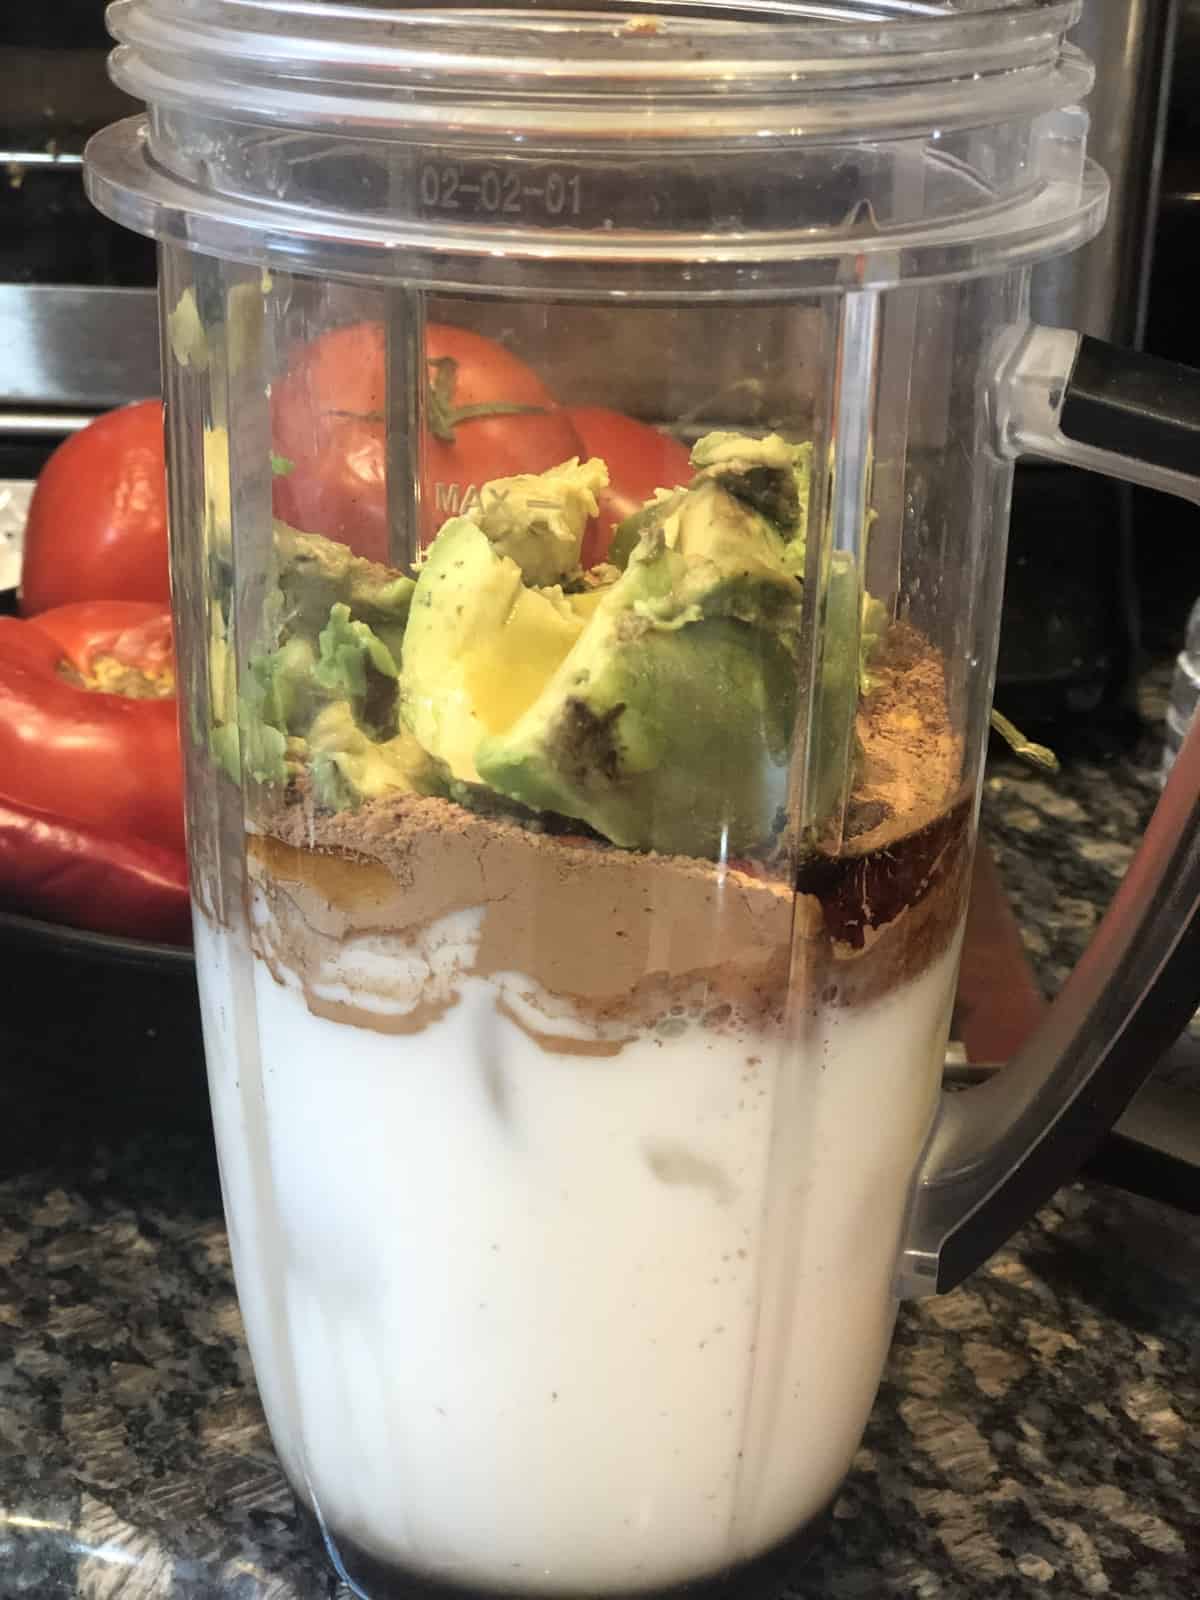 almond milk avocado and cocoa powder in the Nutribullet cup